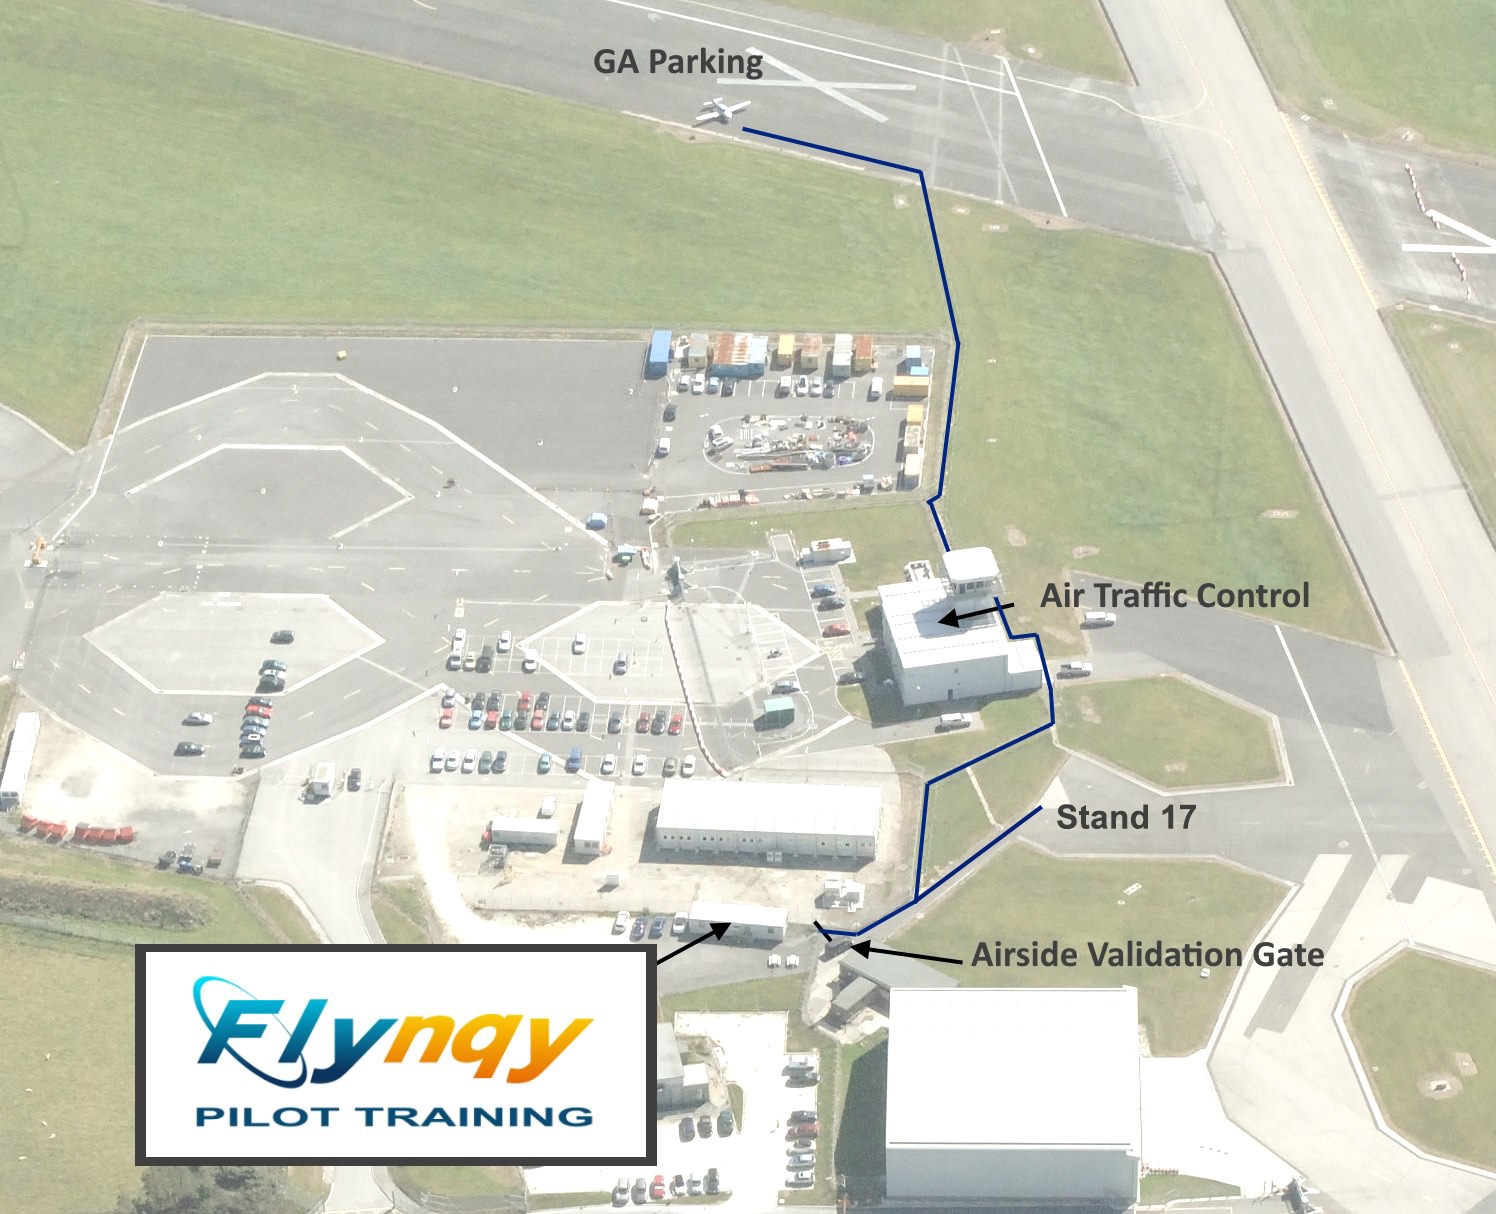 Map from GA Park to Flynqy Pilot Training